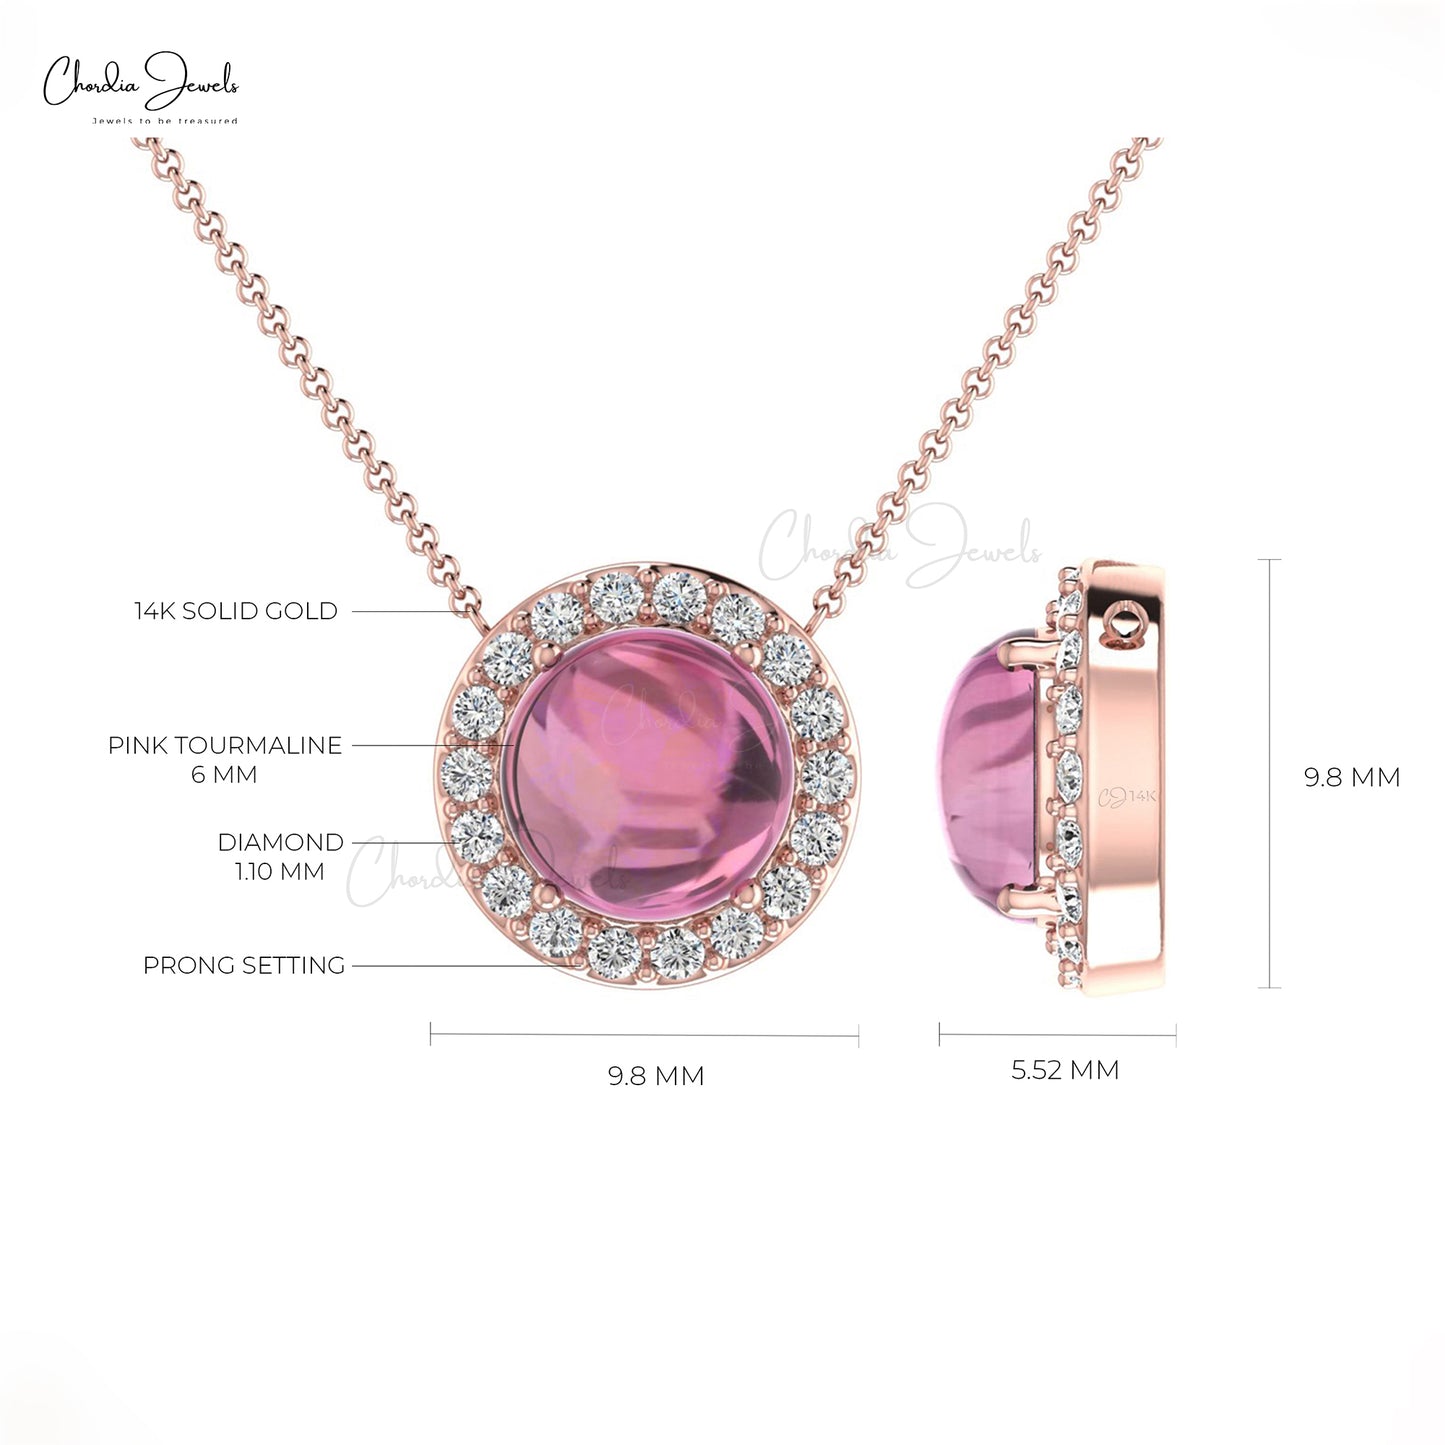 Perfect Pink Tourmaline 6mm Cabochon Necklace in 14K Solid Gold Pink Tourmaline / Rose Gold